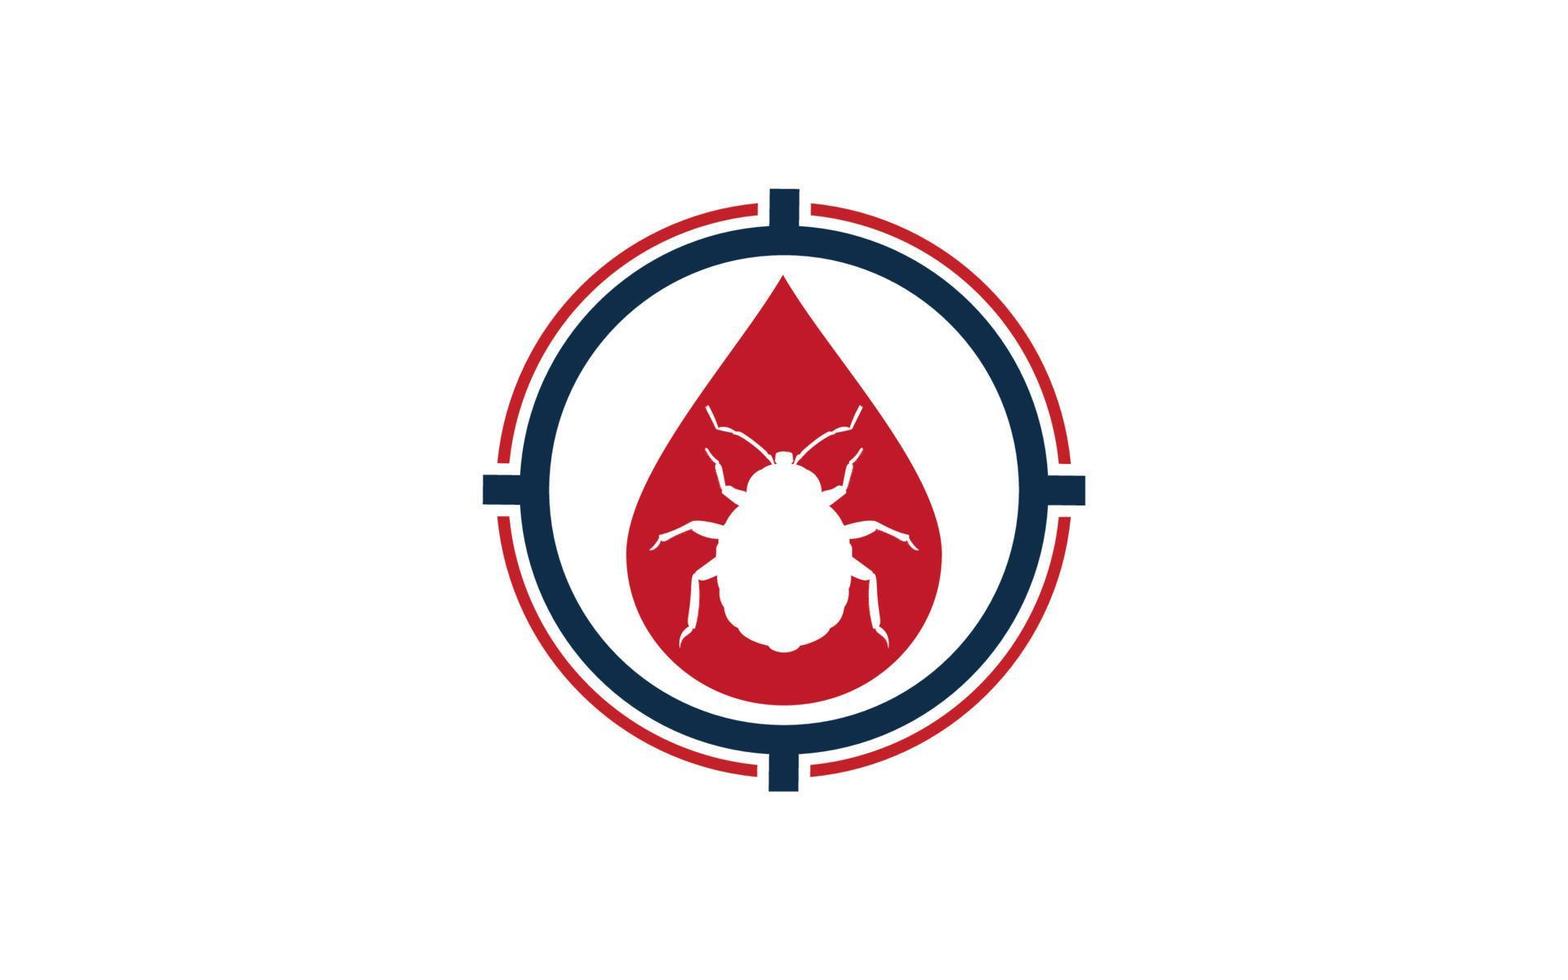 pest control icon and logo for Community, Industrial, Foundation, Security, Tech, Services Company. vector illustration